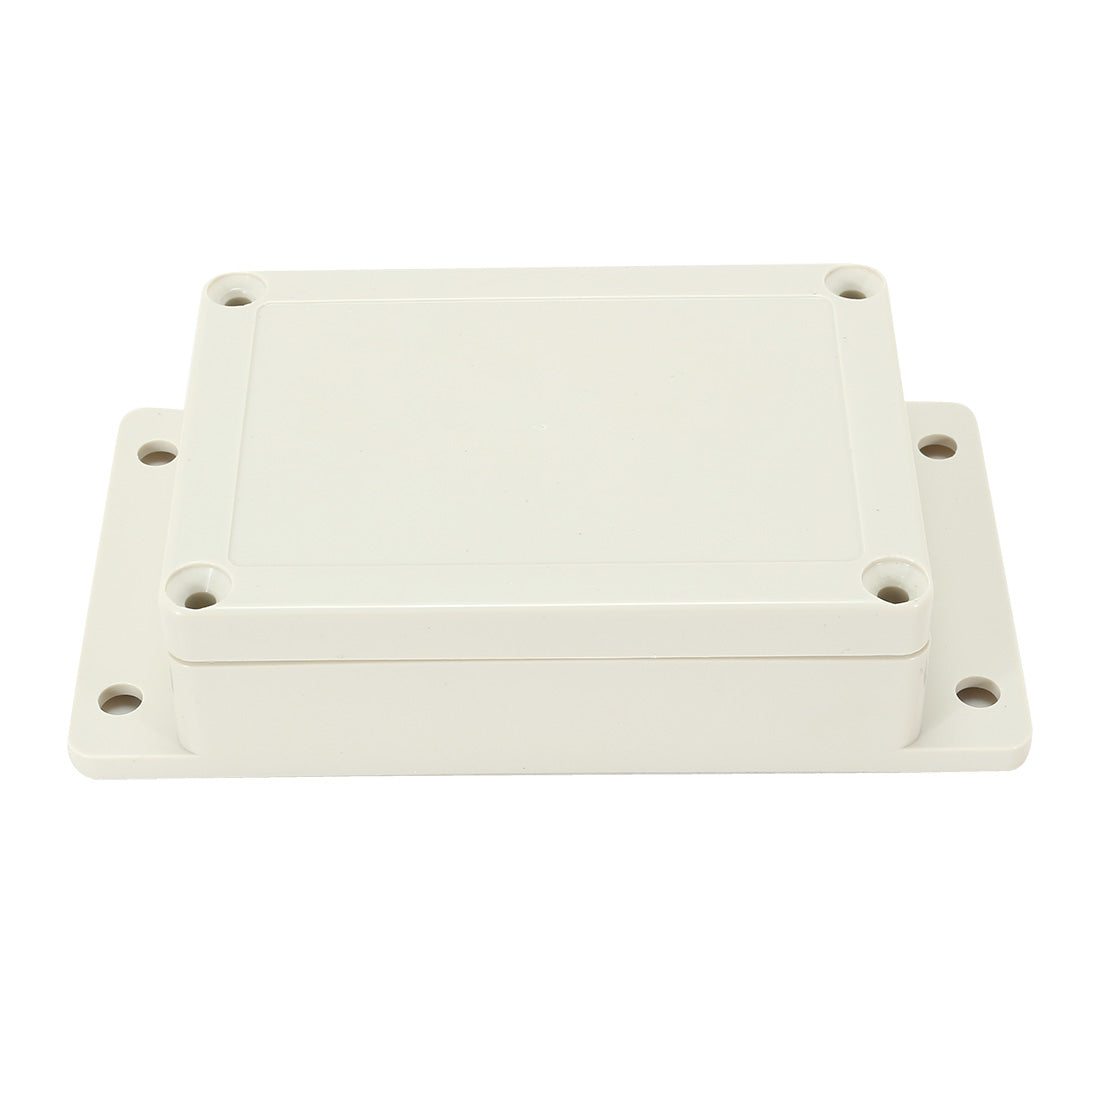 uxcell Uxcell 4.53"x3.35"x1.37"(115mmx85mmx35mm) ABS Junction Box Universal Electric Project Enclosure w Fixed Ear